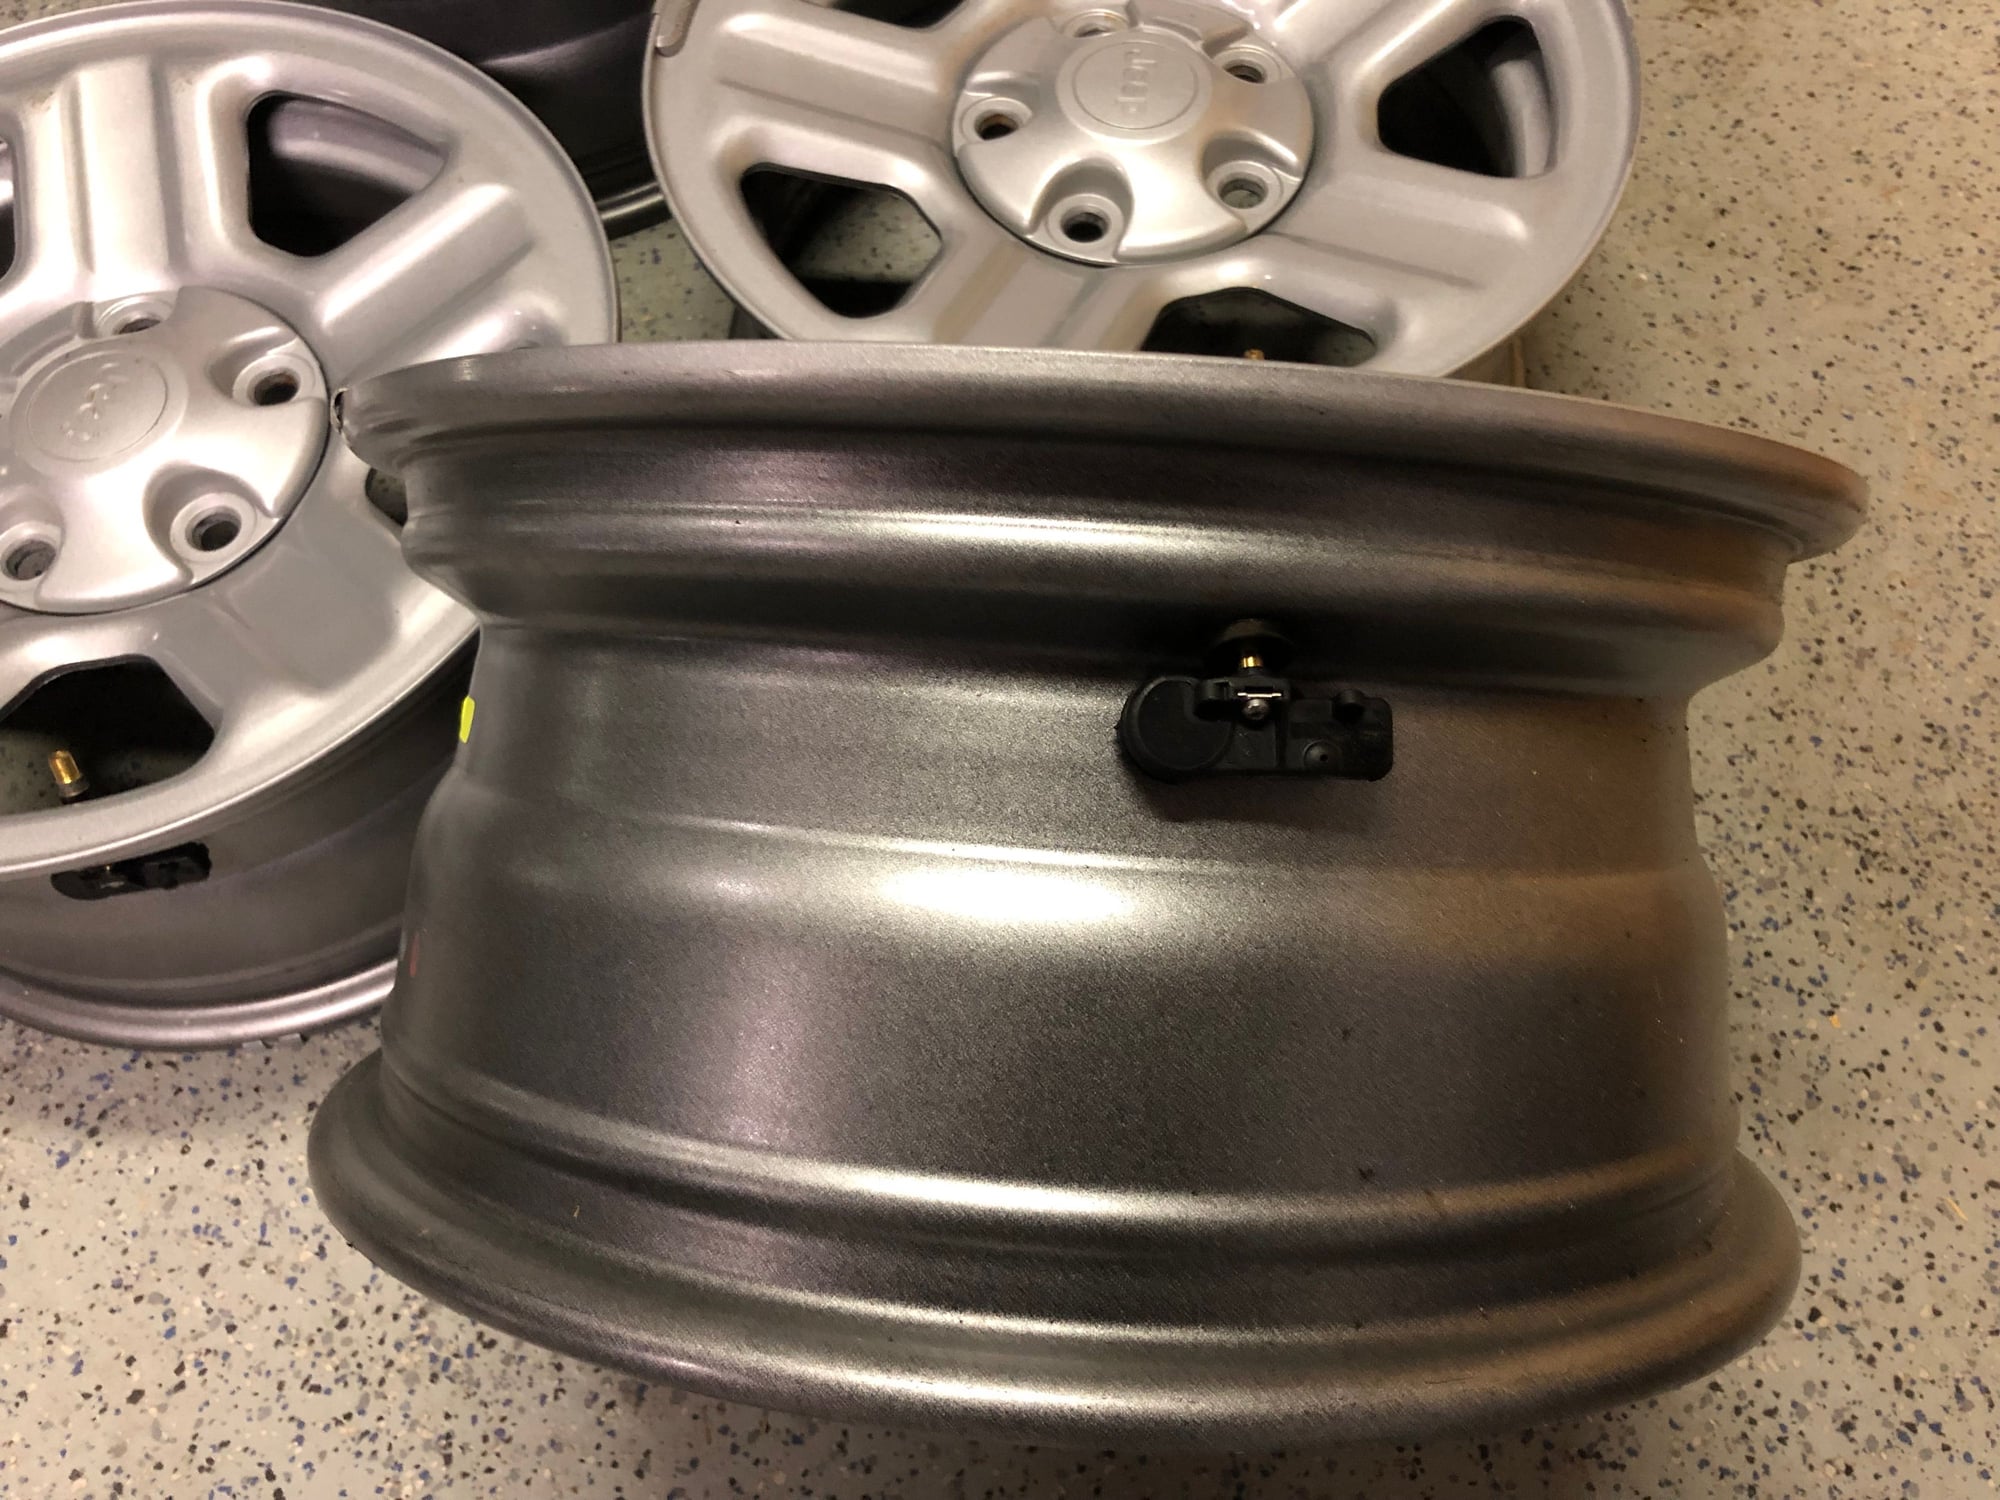 Wheels and Tires/Axles - 5 -- 5 on 5, 17x7 OEM Jeep rims with TPMS sensors - Used - 2008 to 2017 Jeep Wrangler - Schererville, IN 46375, United States